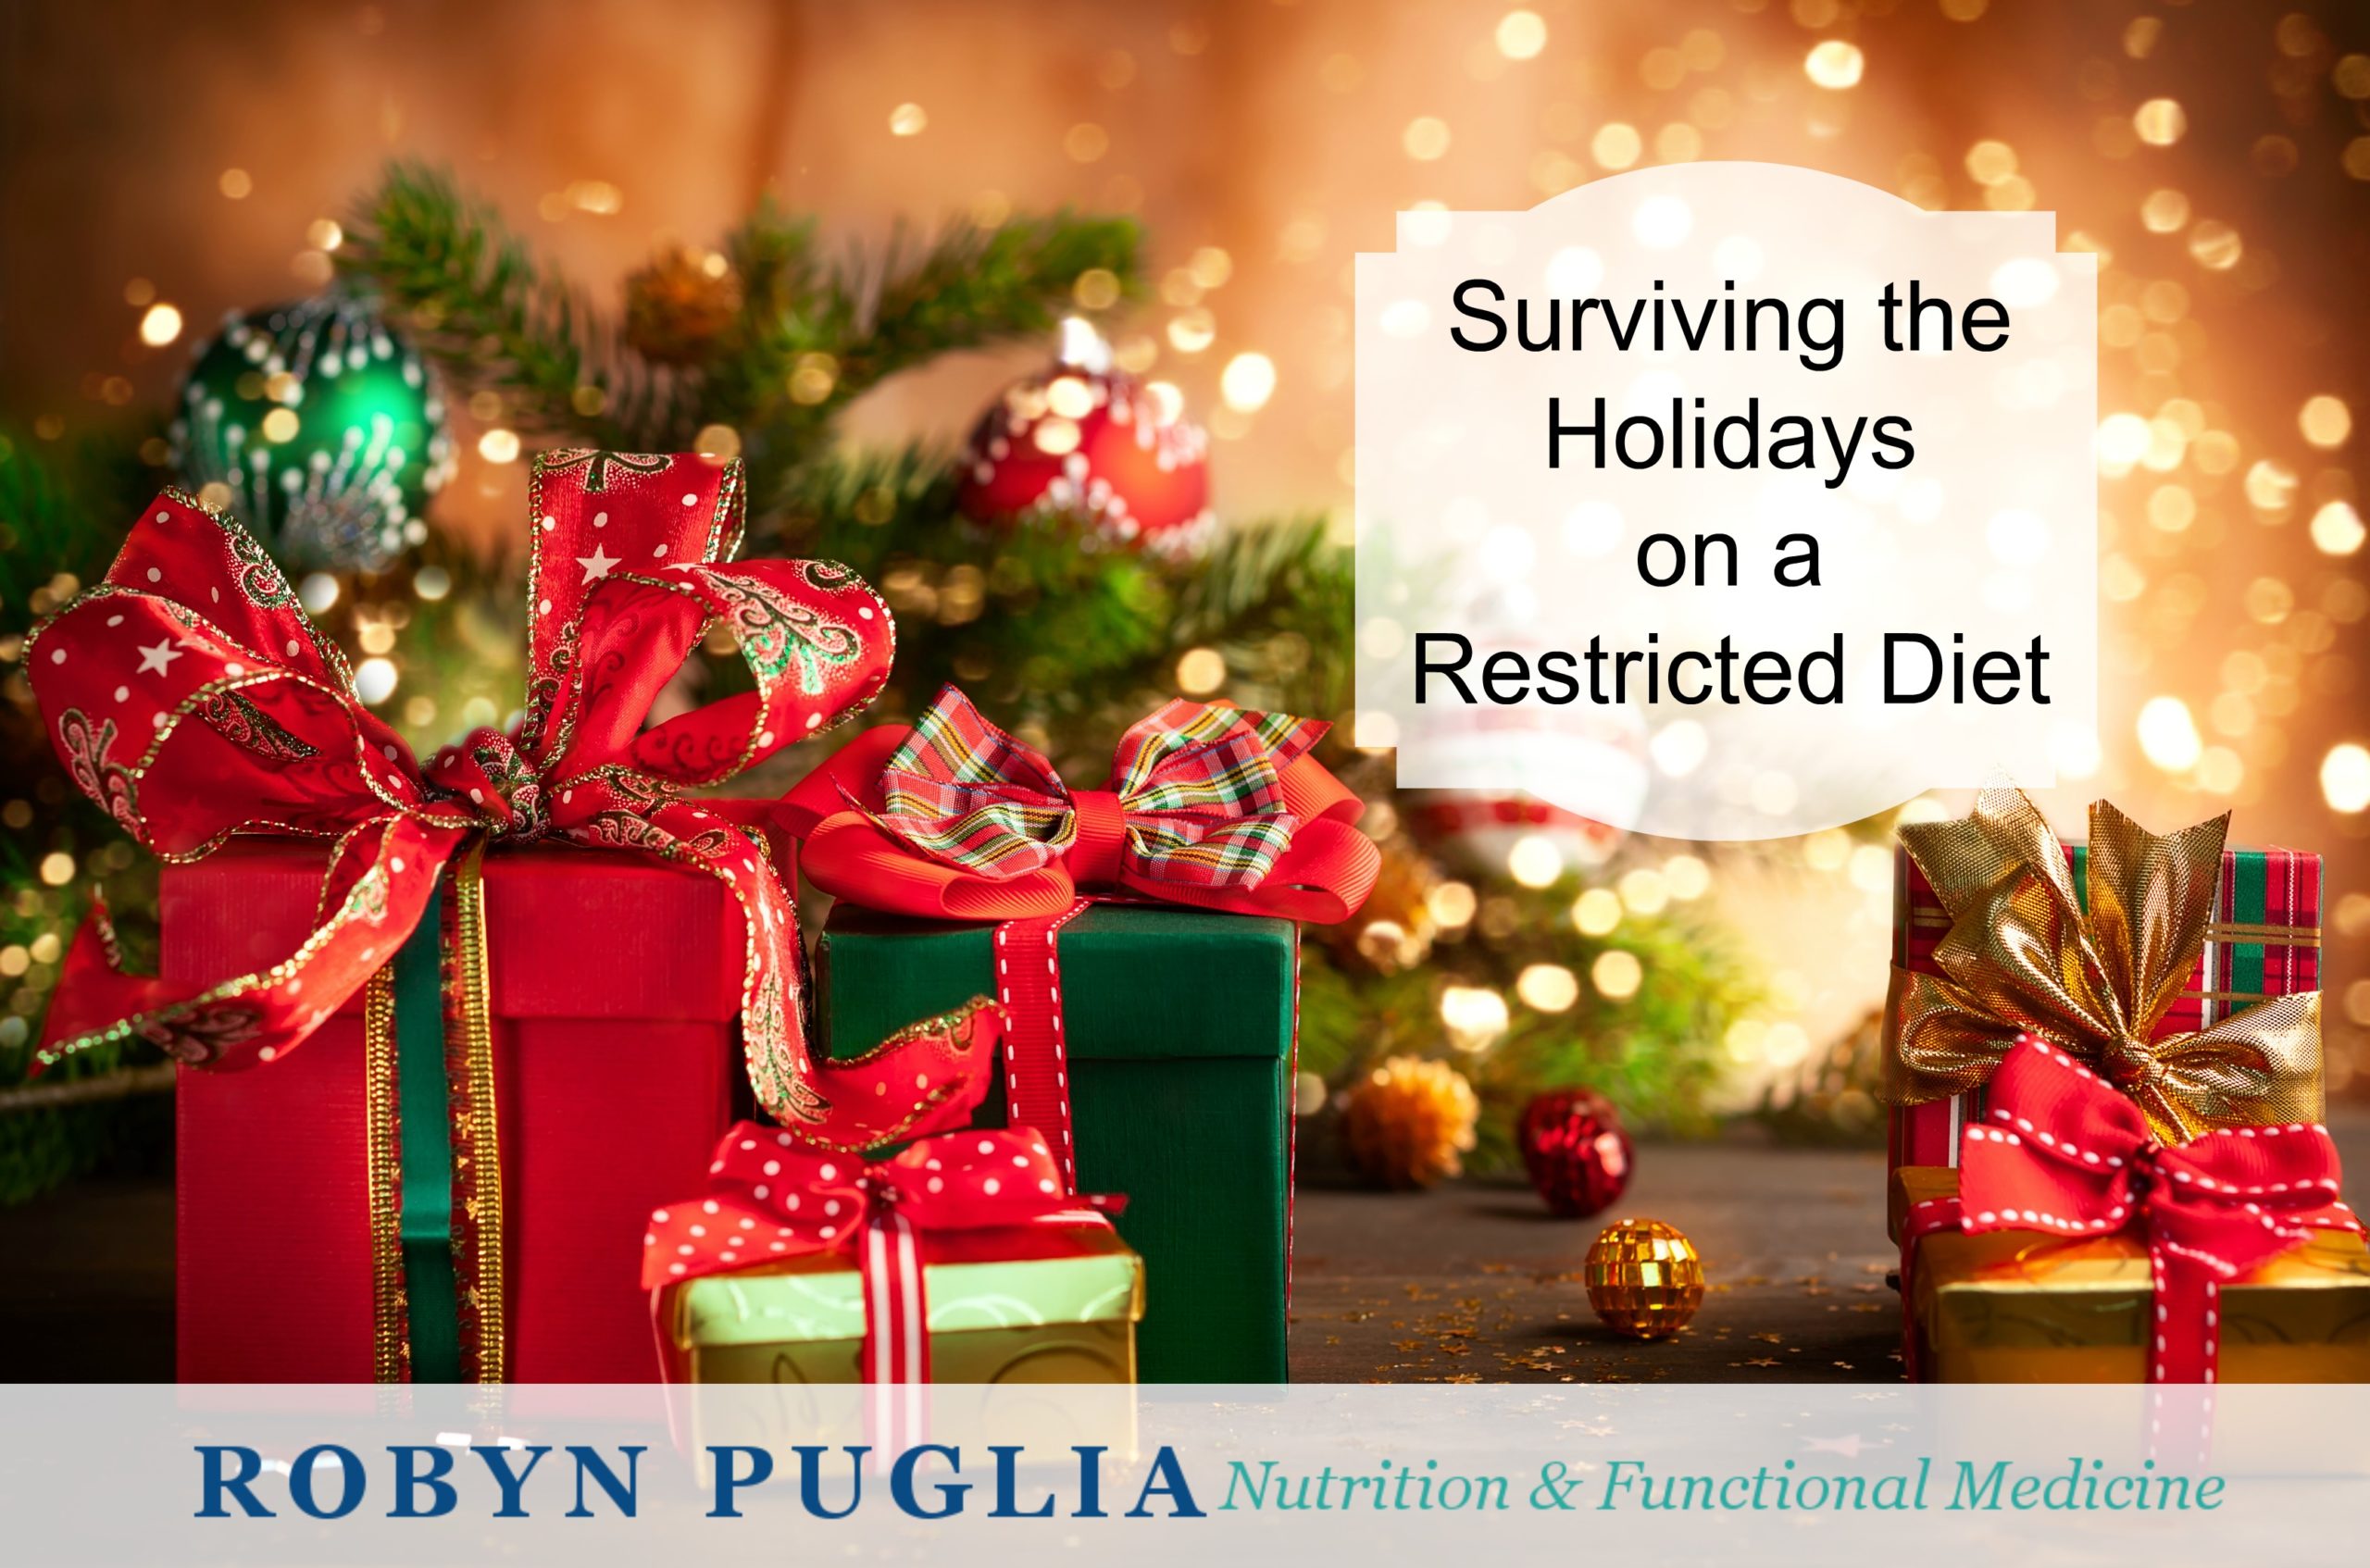 How To Survive The Holidays on a Restricted Diet